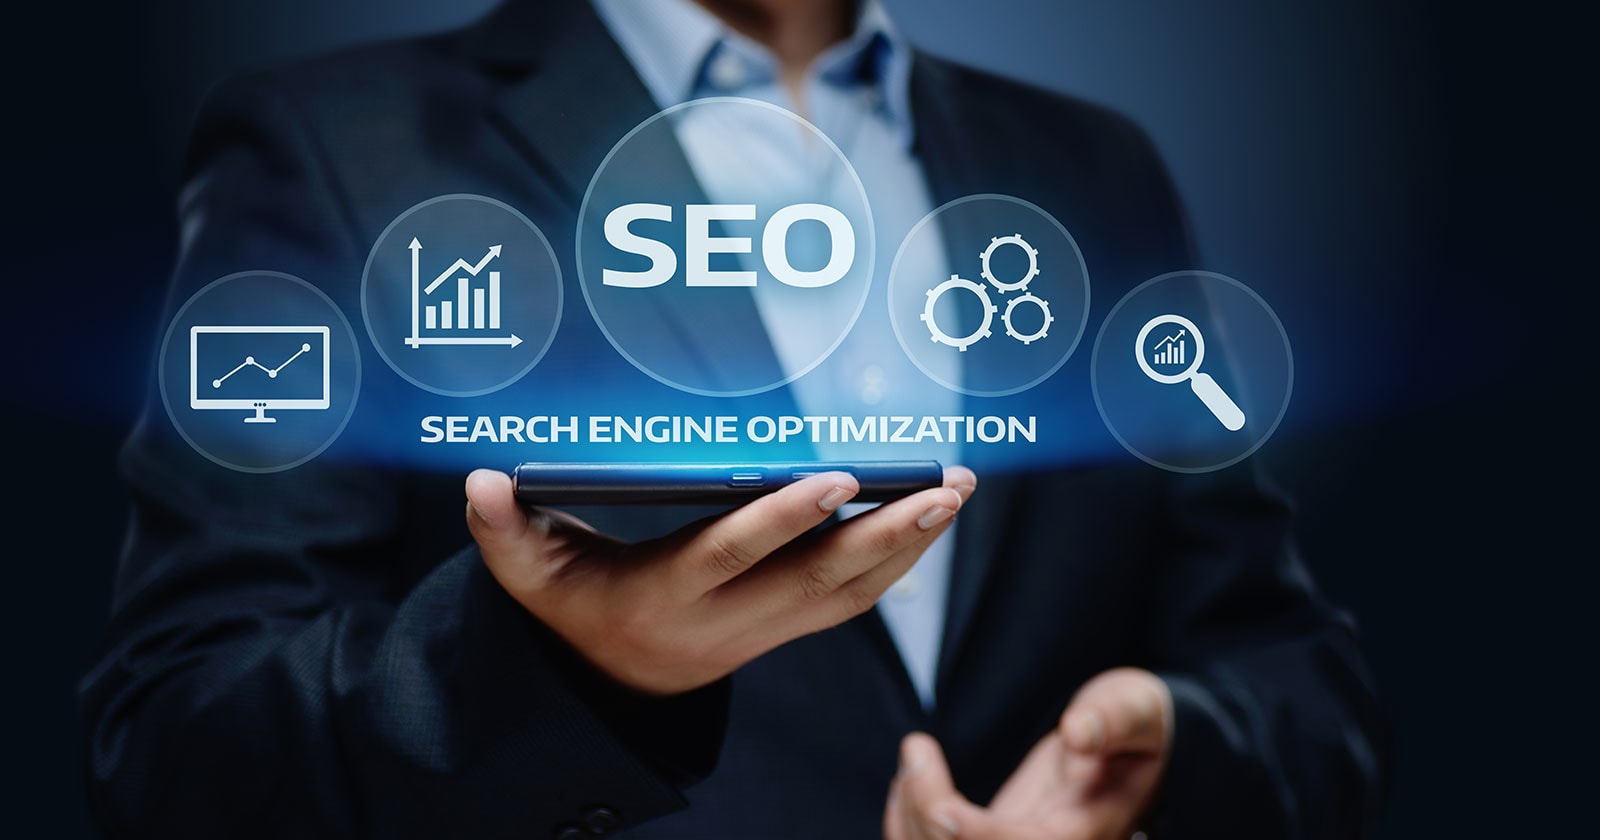 The Benefits of Seo Services for Your Business in 2020